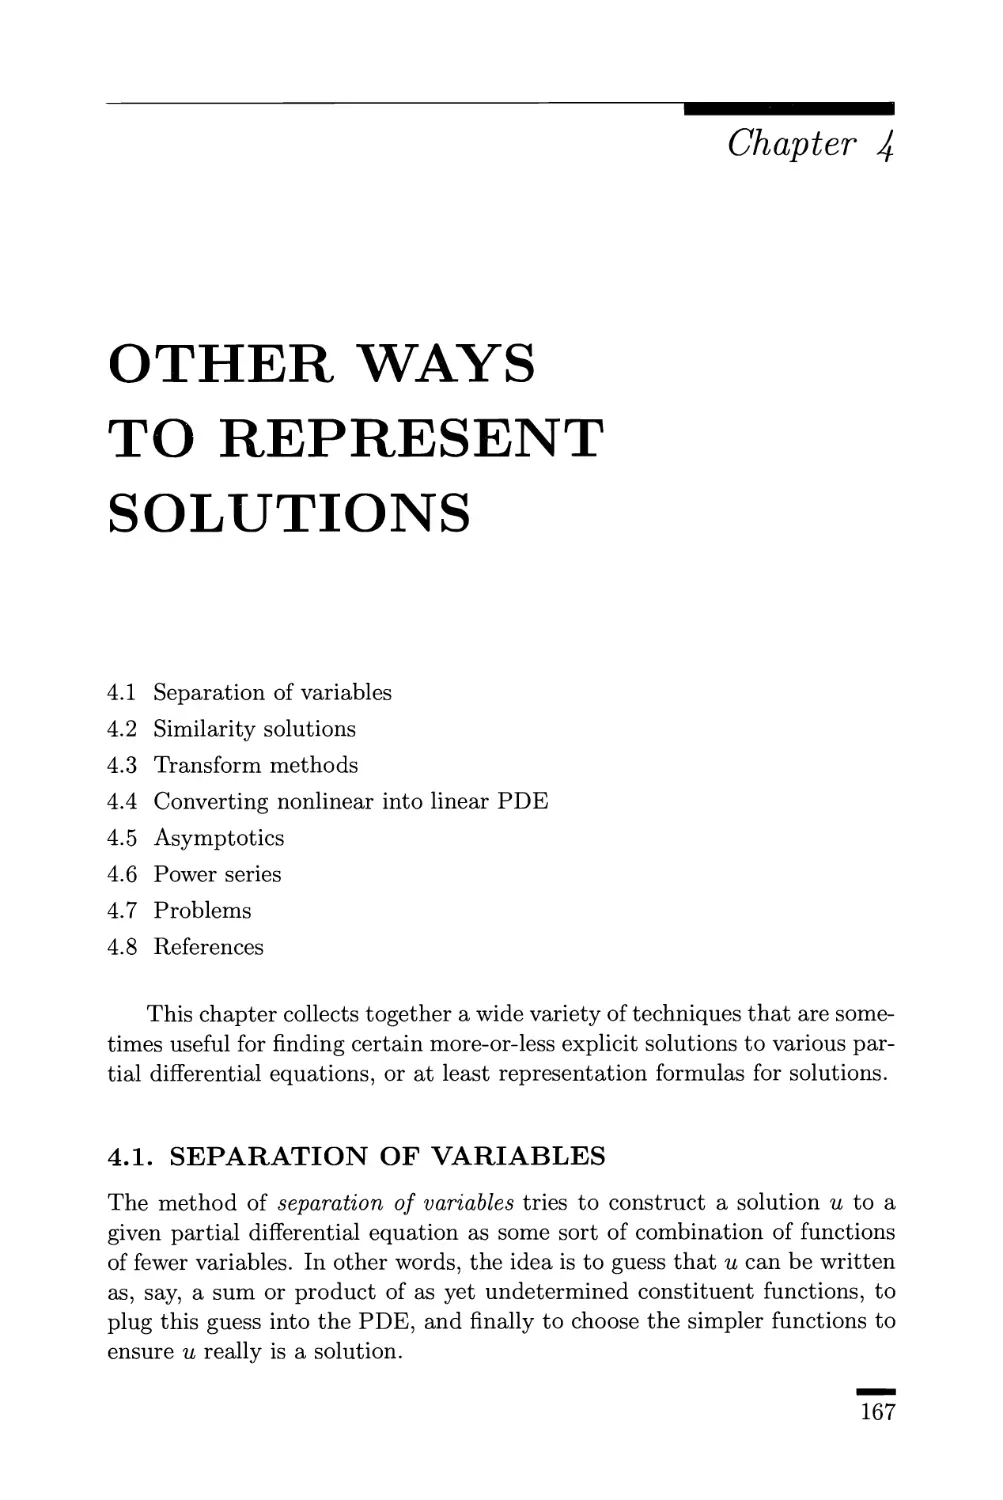 4. Other Ways to Represent Solutions